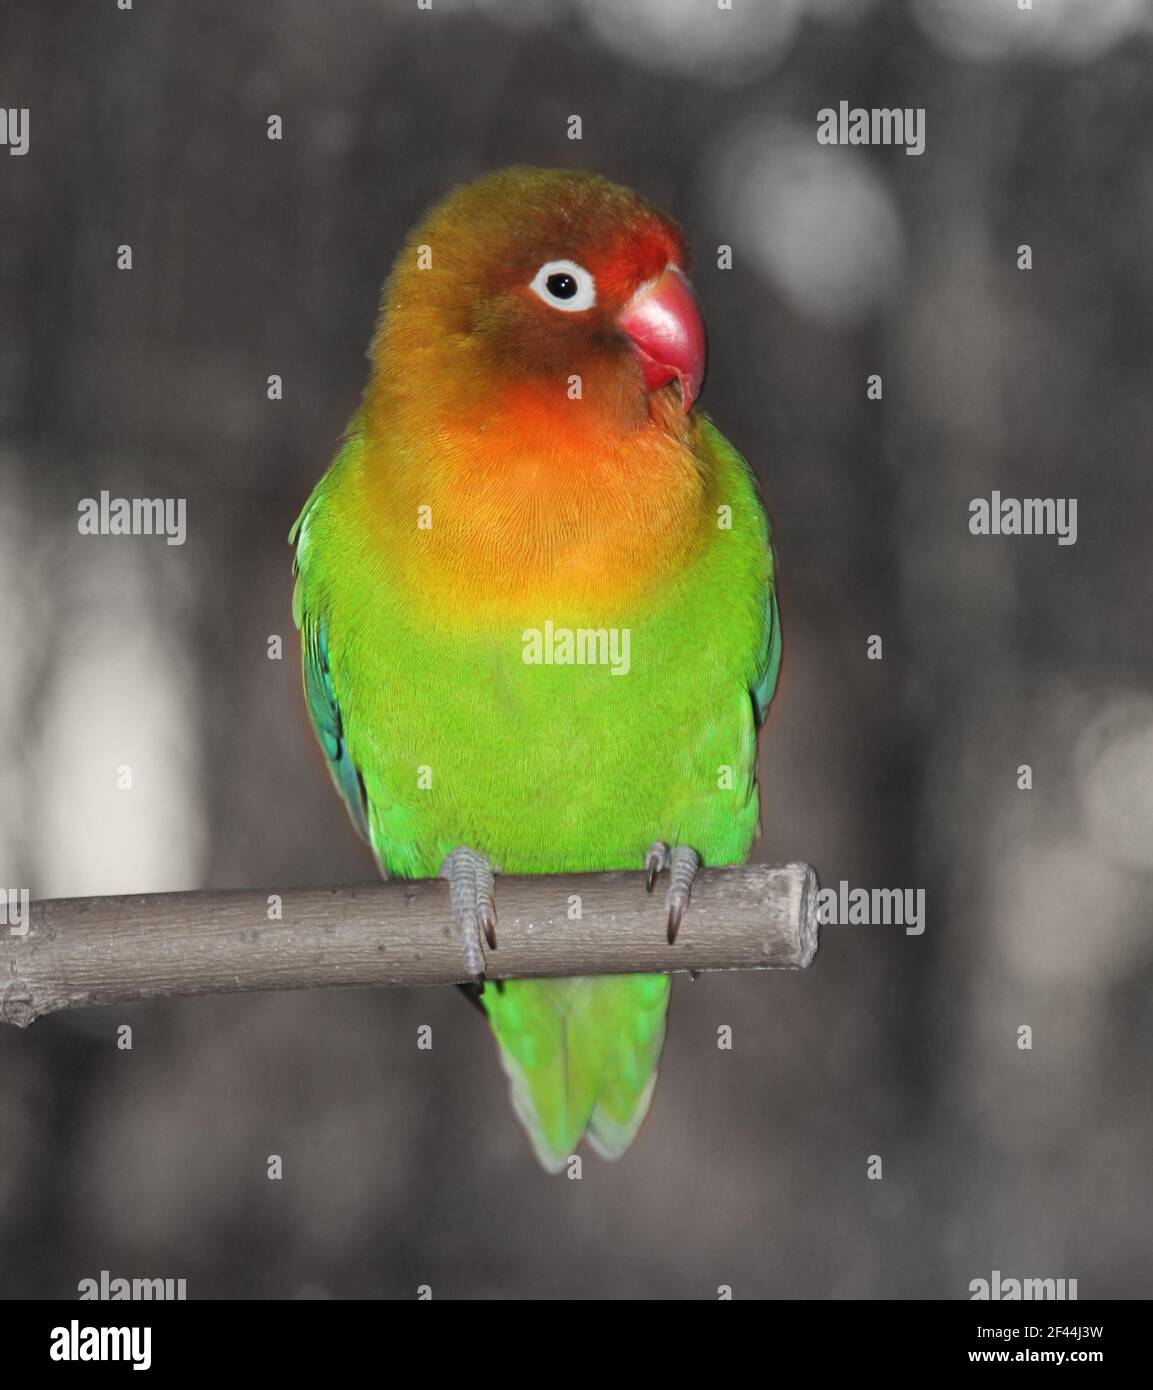 A fisheri's lovebird a cute colorful small parrot Stock Photo